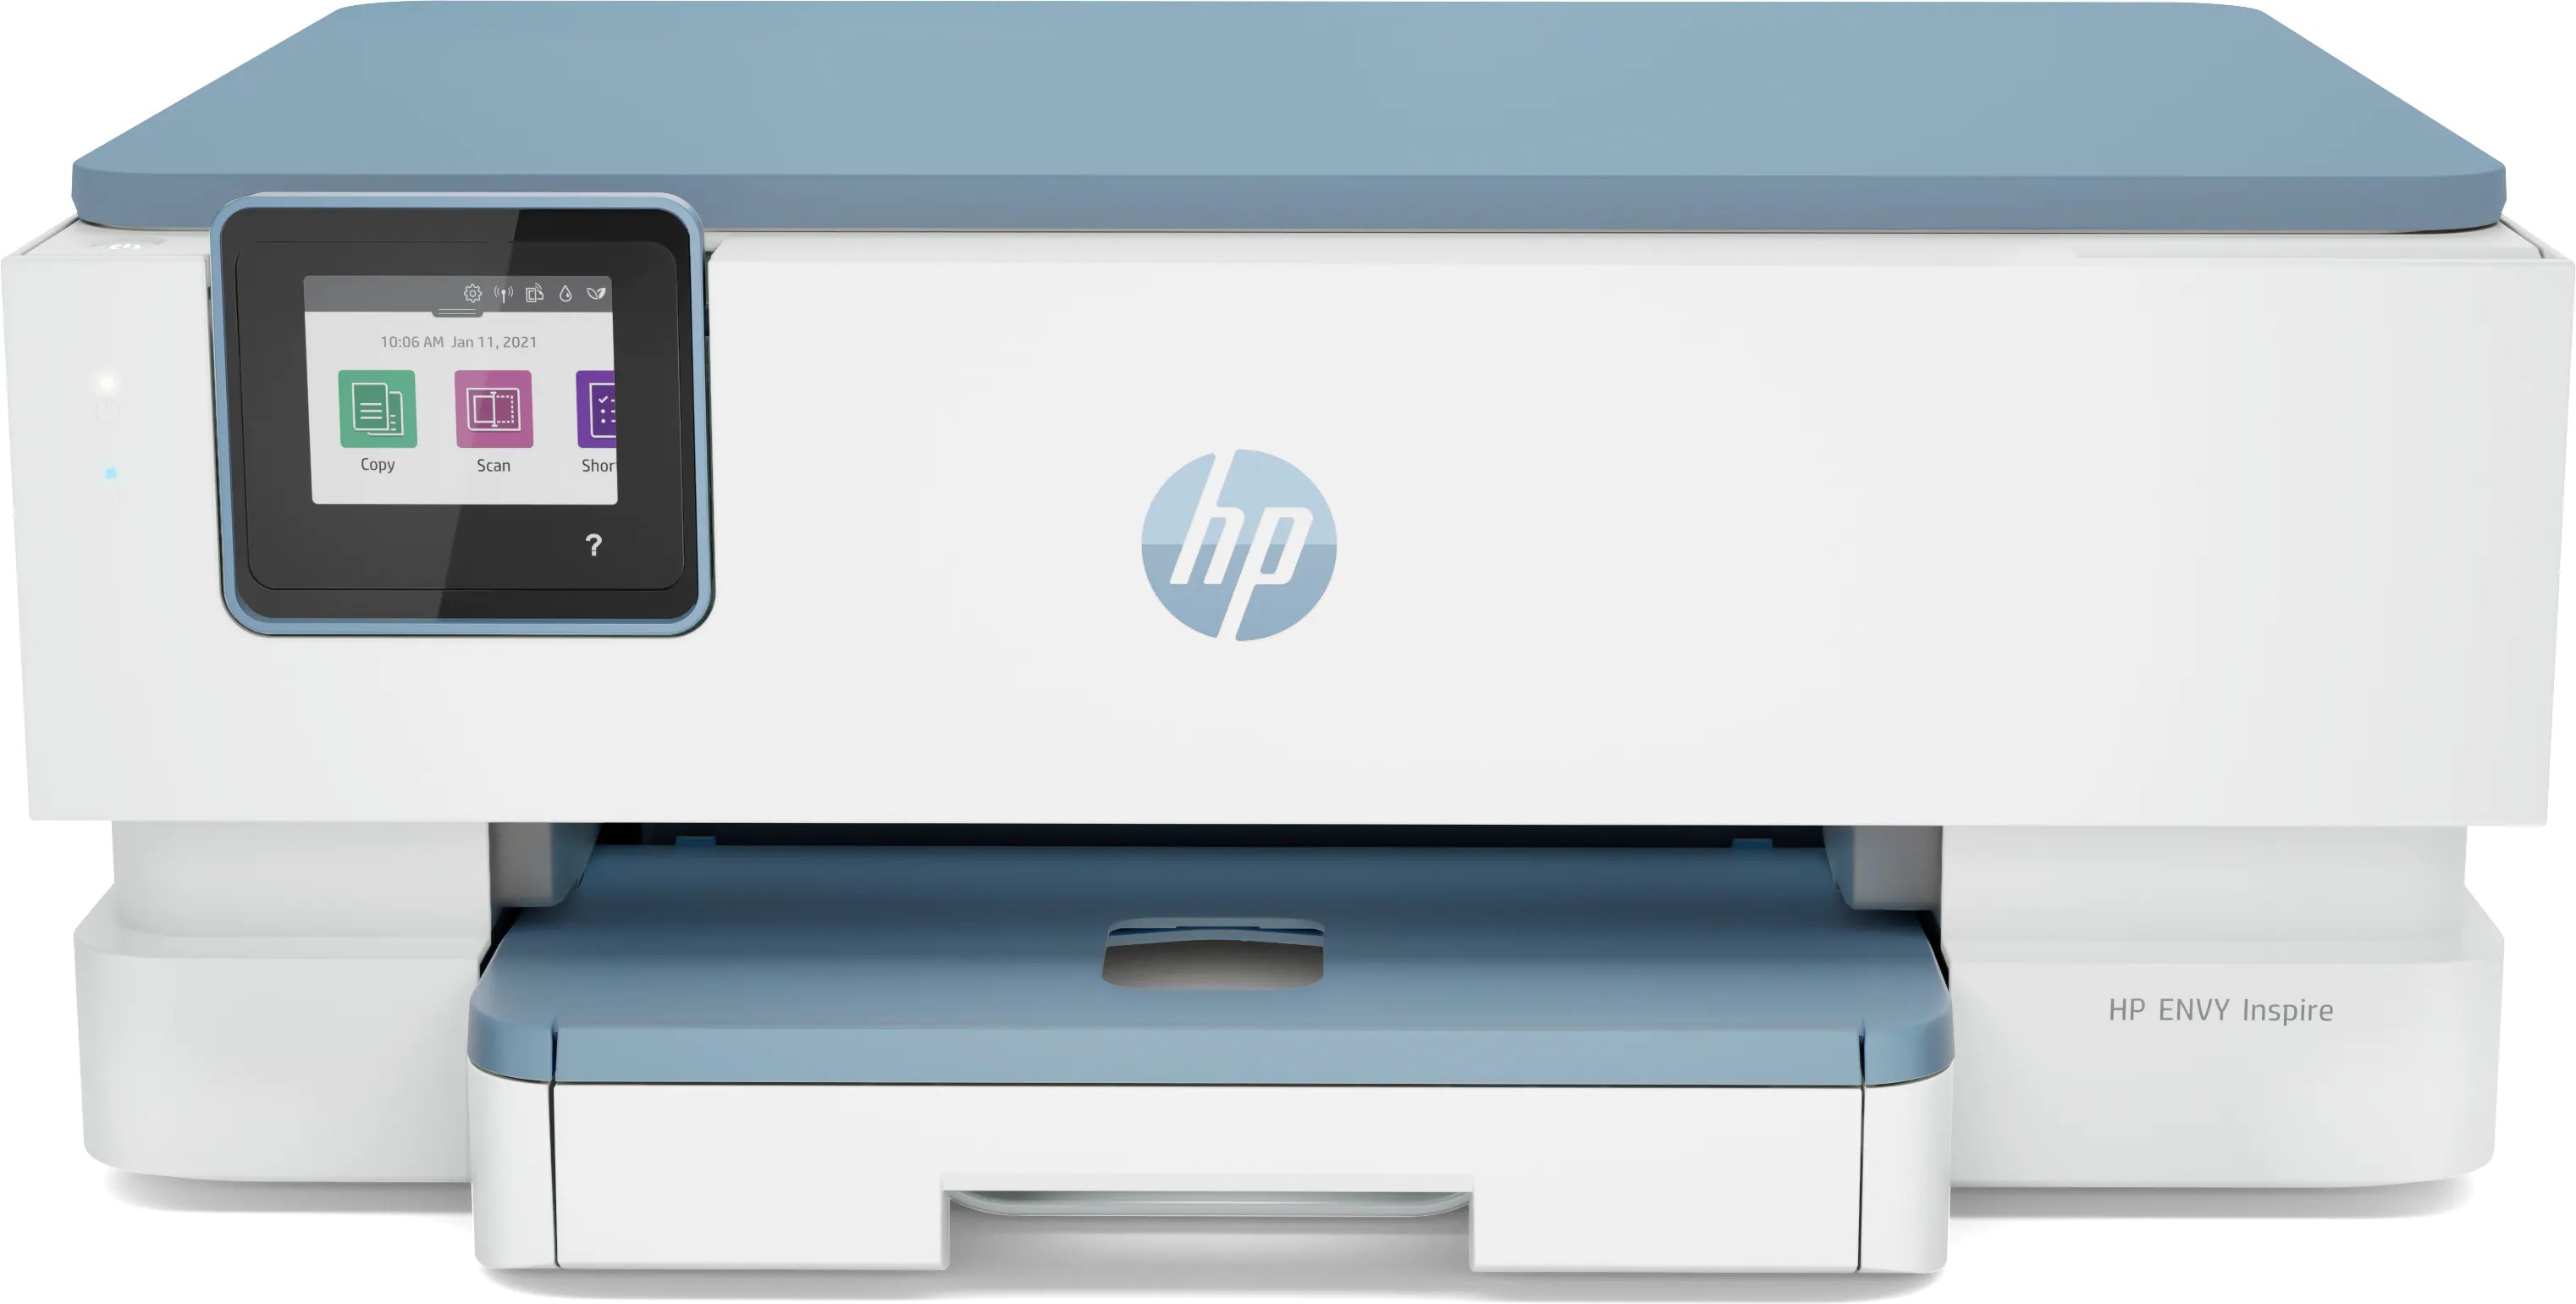 HP ENVY Inspire 7221e All-in-One printer, HP Instant Ink, HP+